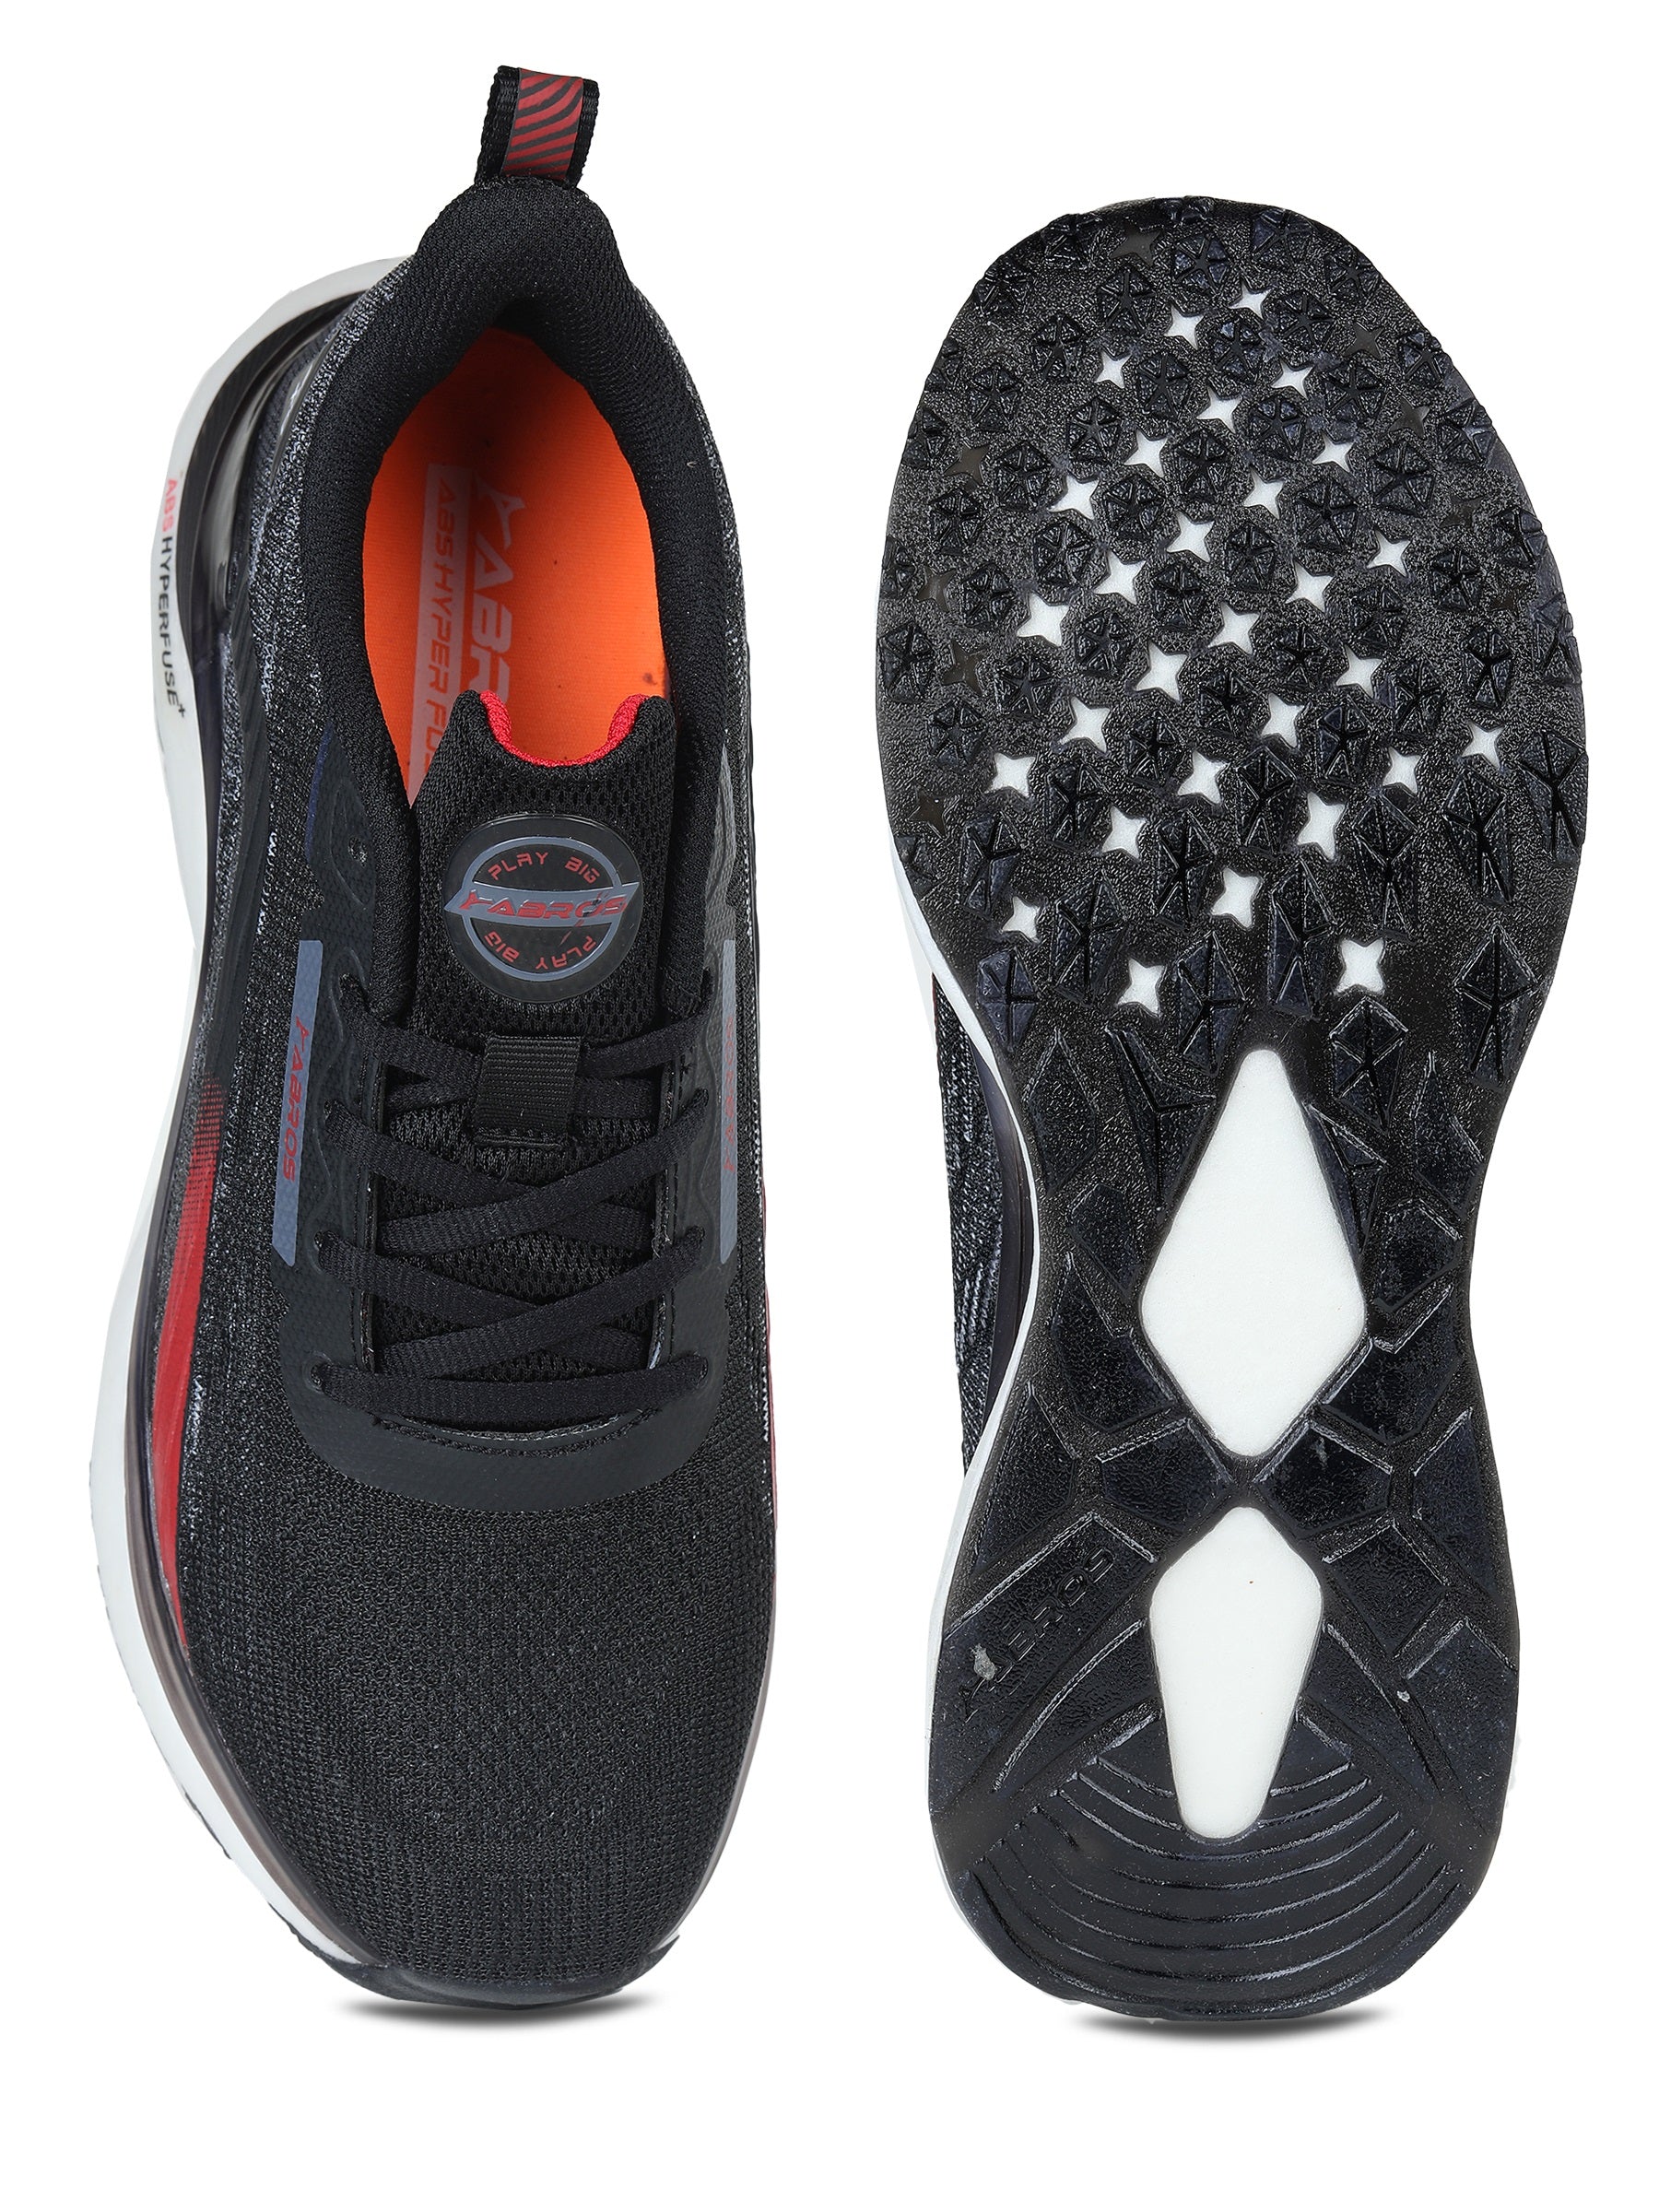 SLEDGE Sports shoes For Men's